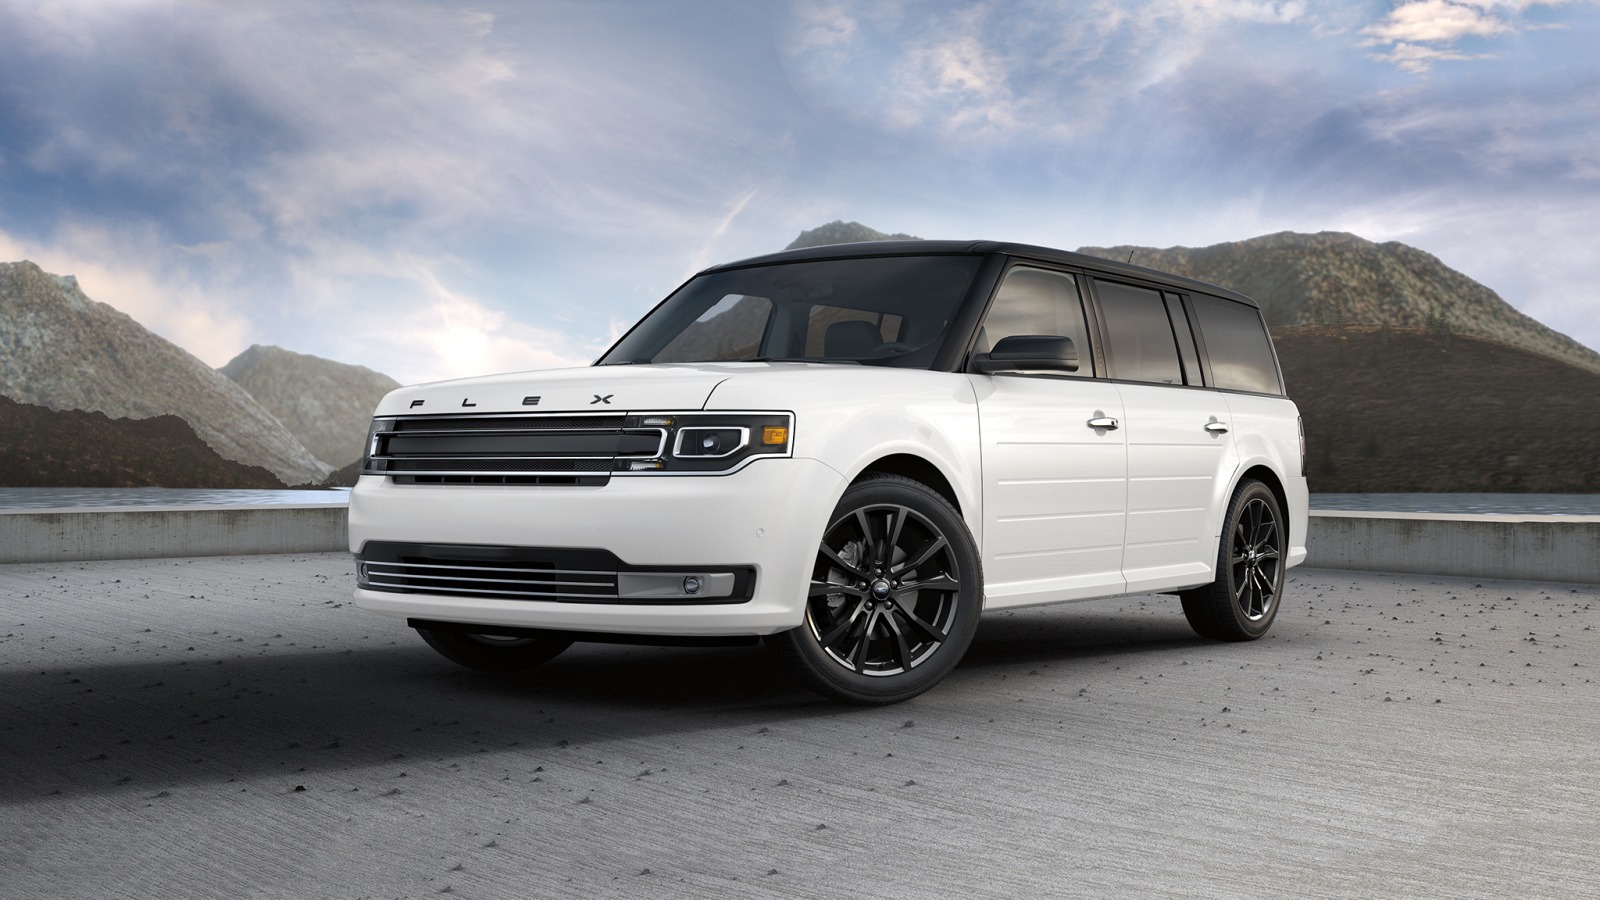 Used 2018 Ford Flex Limited Wagon Review & Ratings | Edmunds